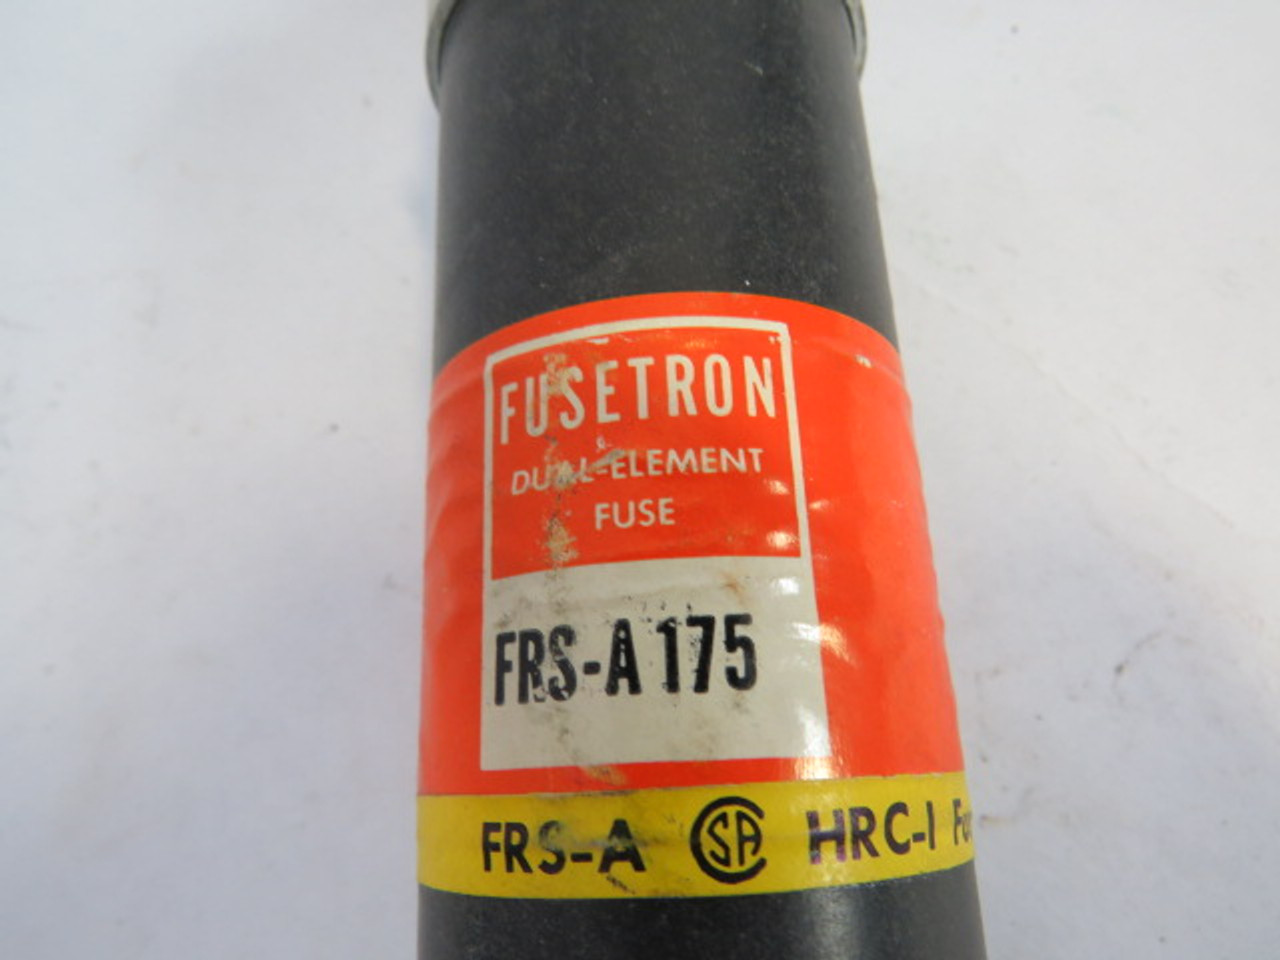 Fusetron FRS-A-175 Dual Element Fuse 175A 600V USED